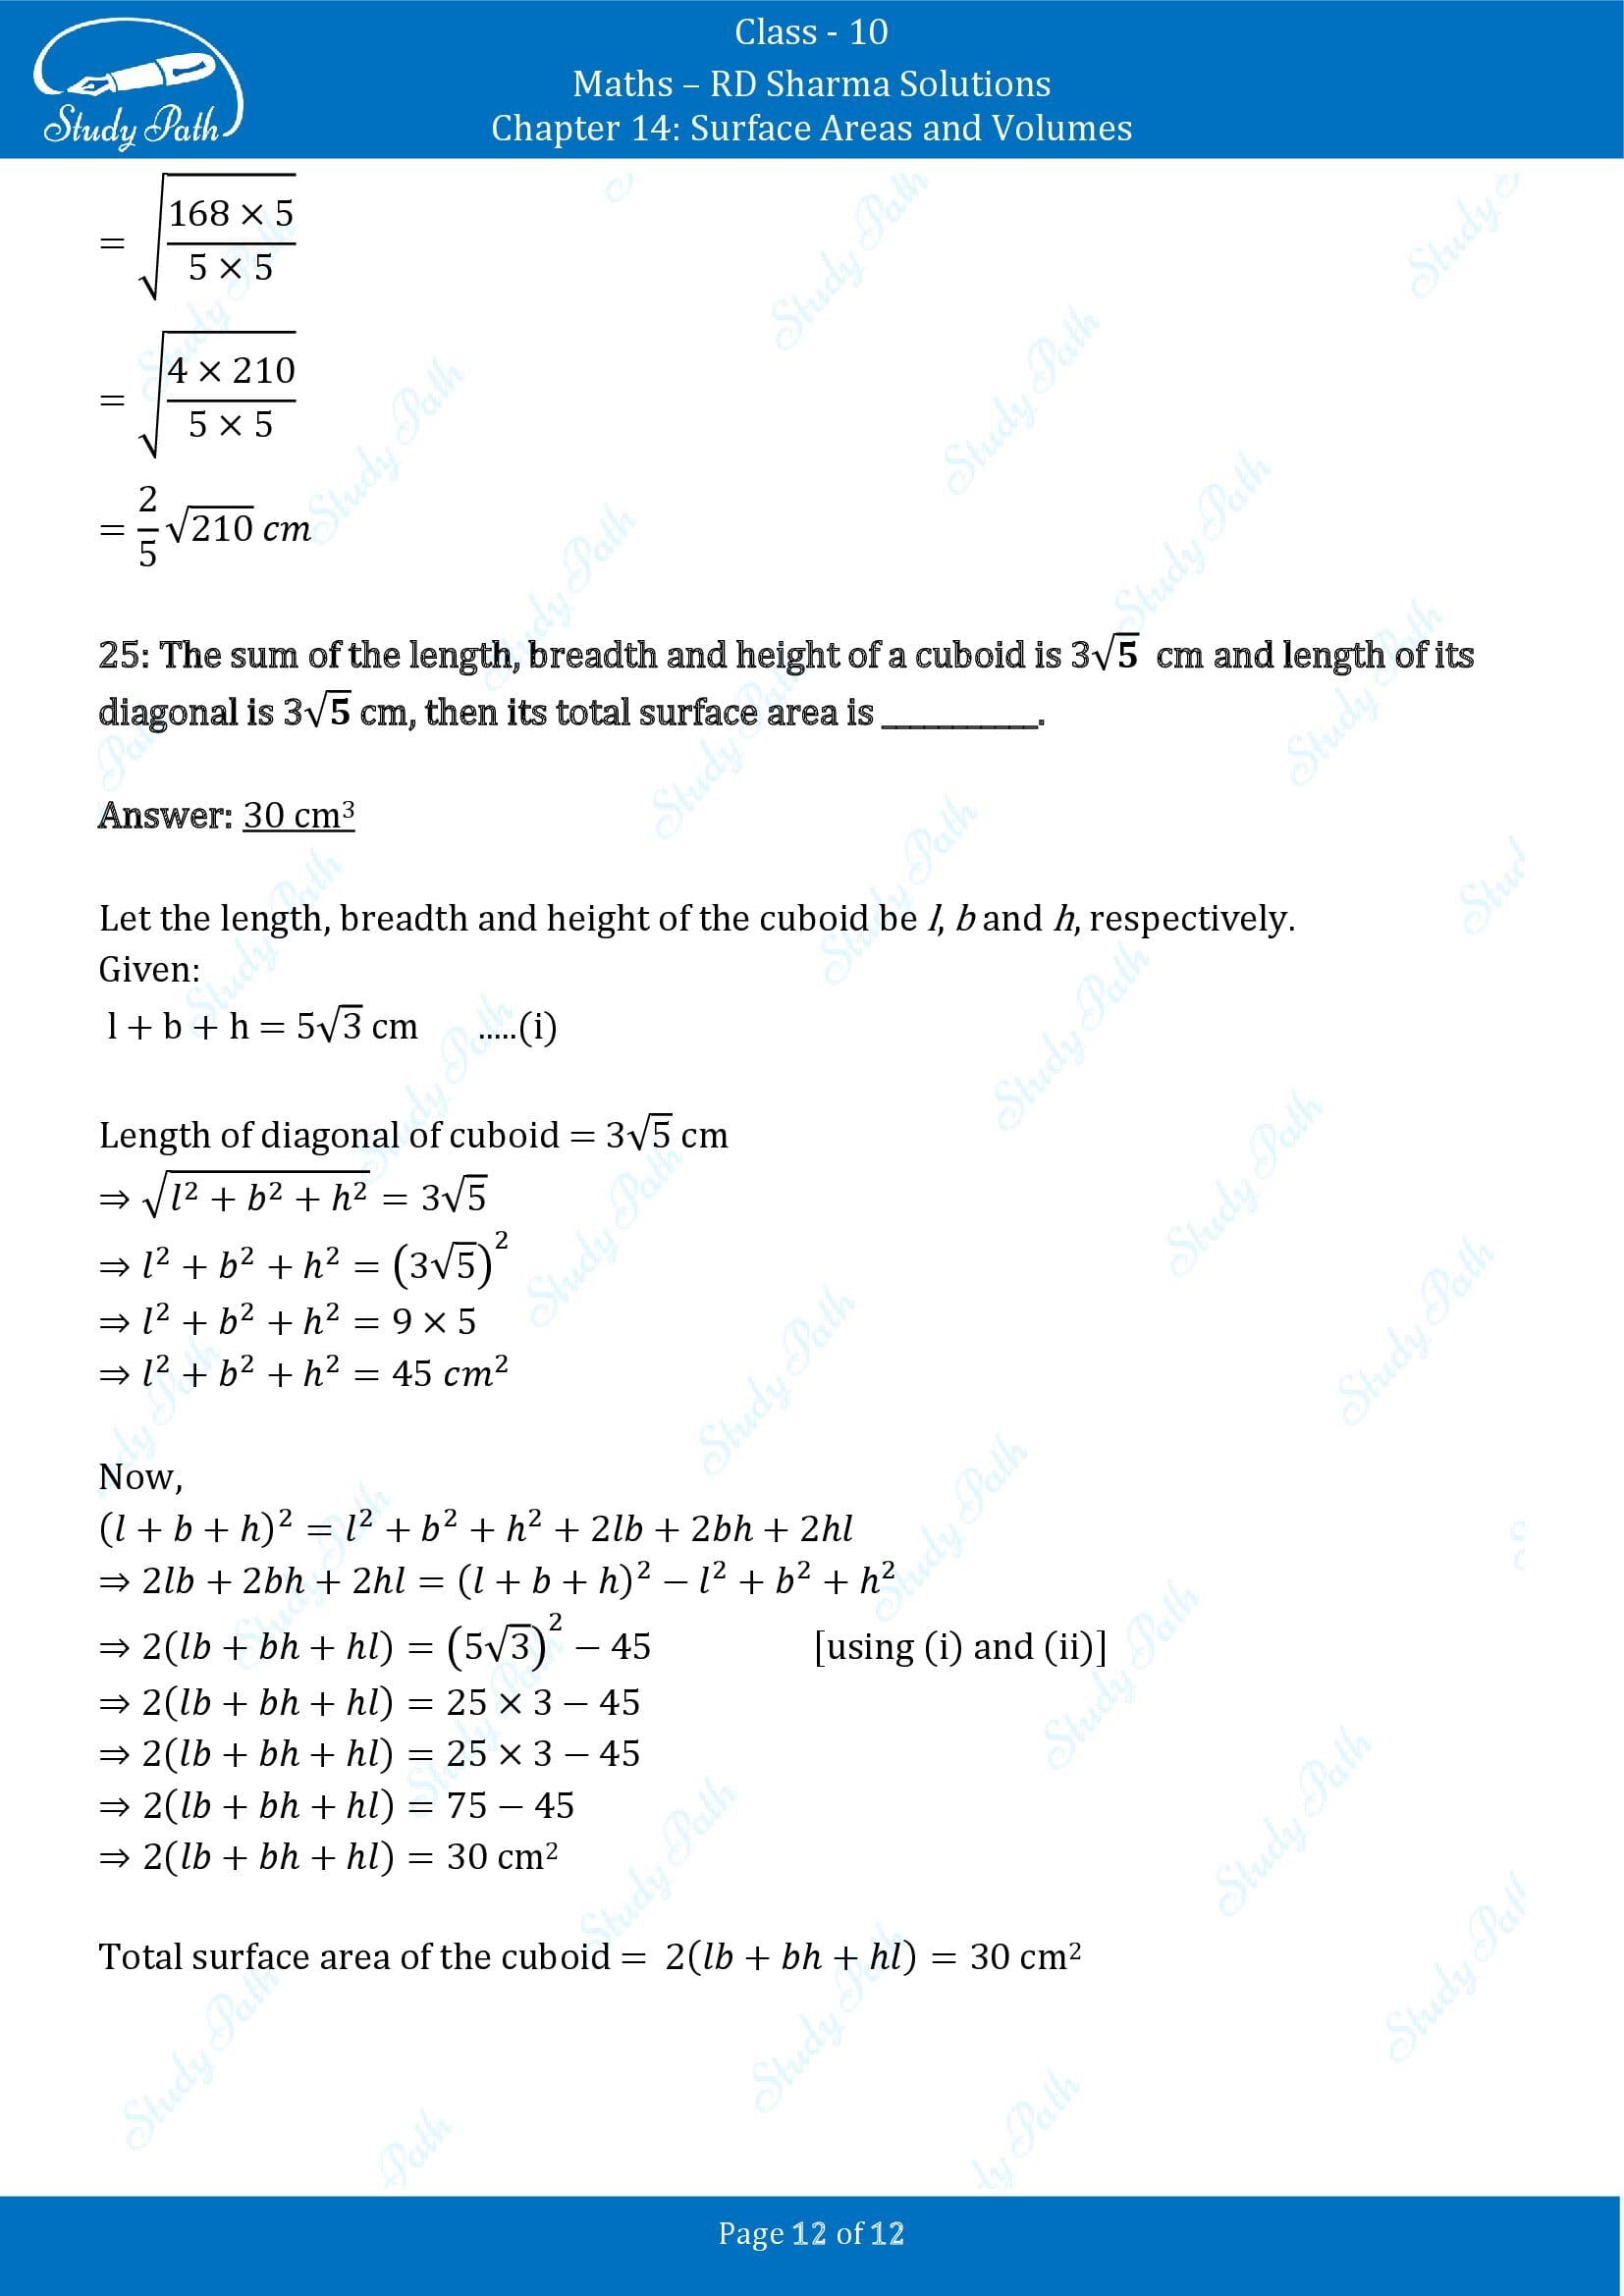 RD Sharma Solutions Class 10 Chapter 14 Surface Areas and Volumes Fill in the Blank Type Questions FBQs 00012